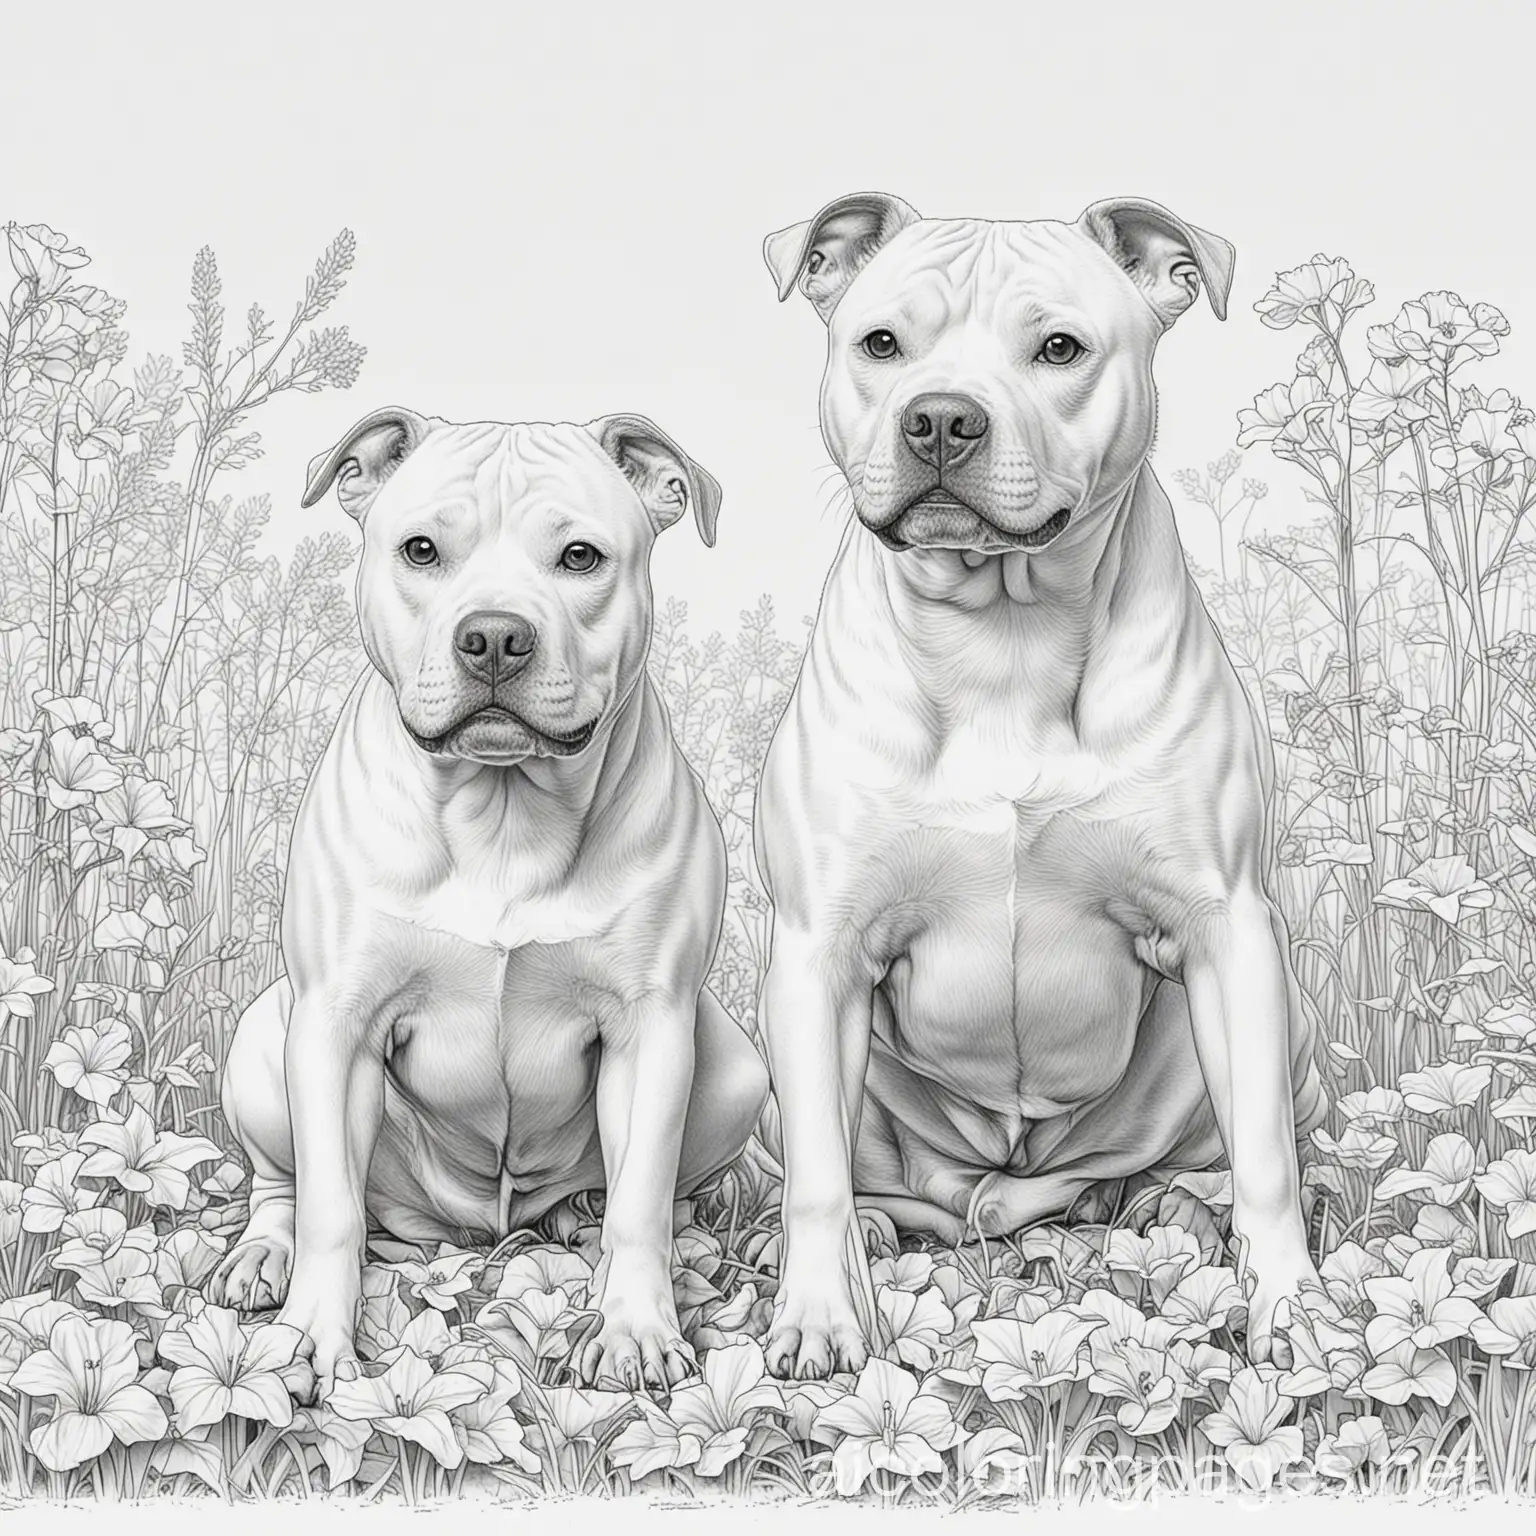 two pittbull dogs playing in the 
spring, Coloring Page, black and white, line art, white background, Simplicity, Ample White Space. The background of the coloring page is plain white to make it easy for young children to color within the lines. The outlines of all the subjects are easy to distinguish, making it simple for kids to color without too much difficulty